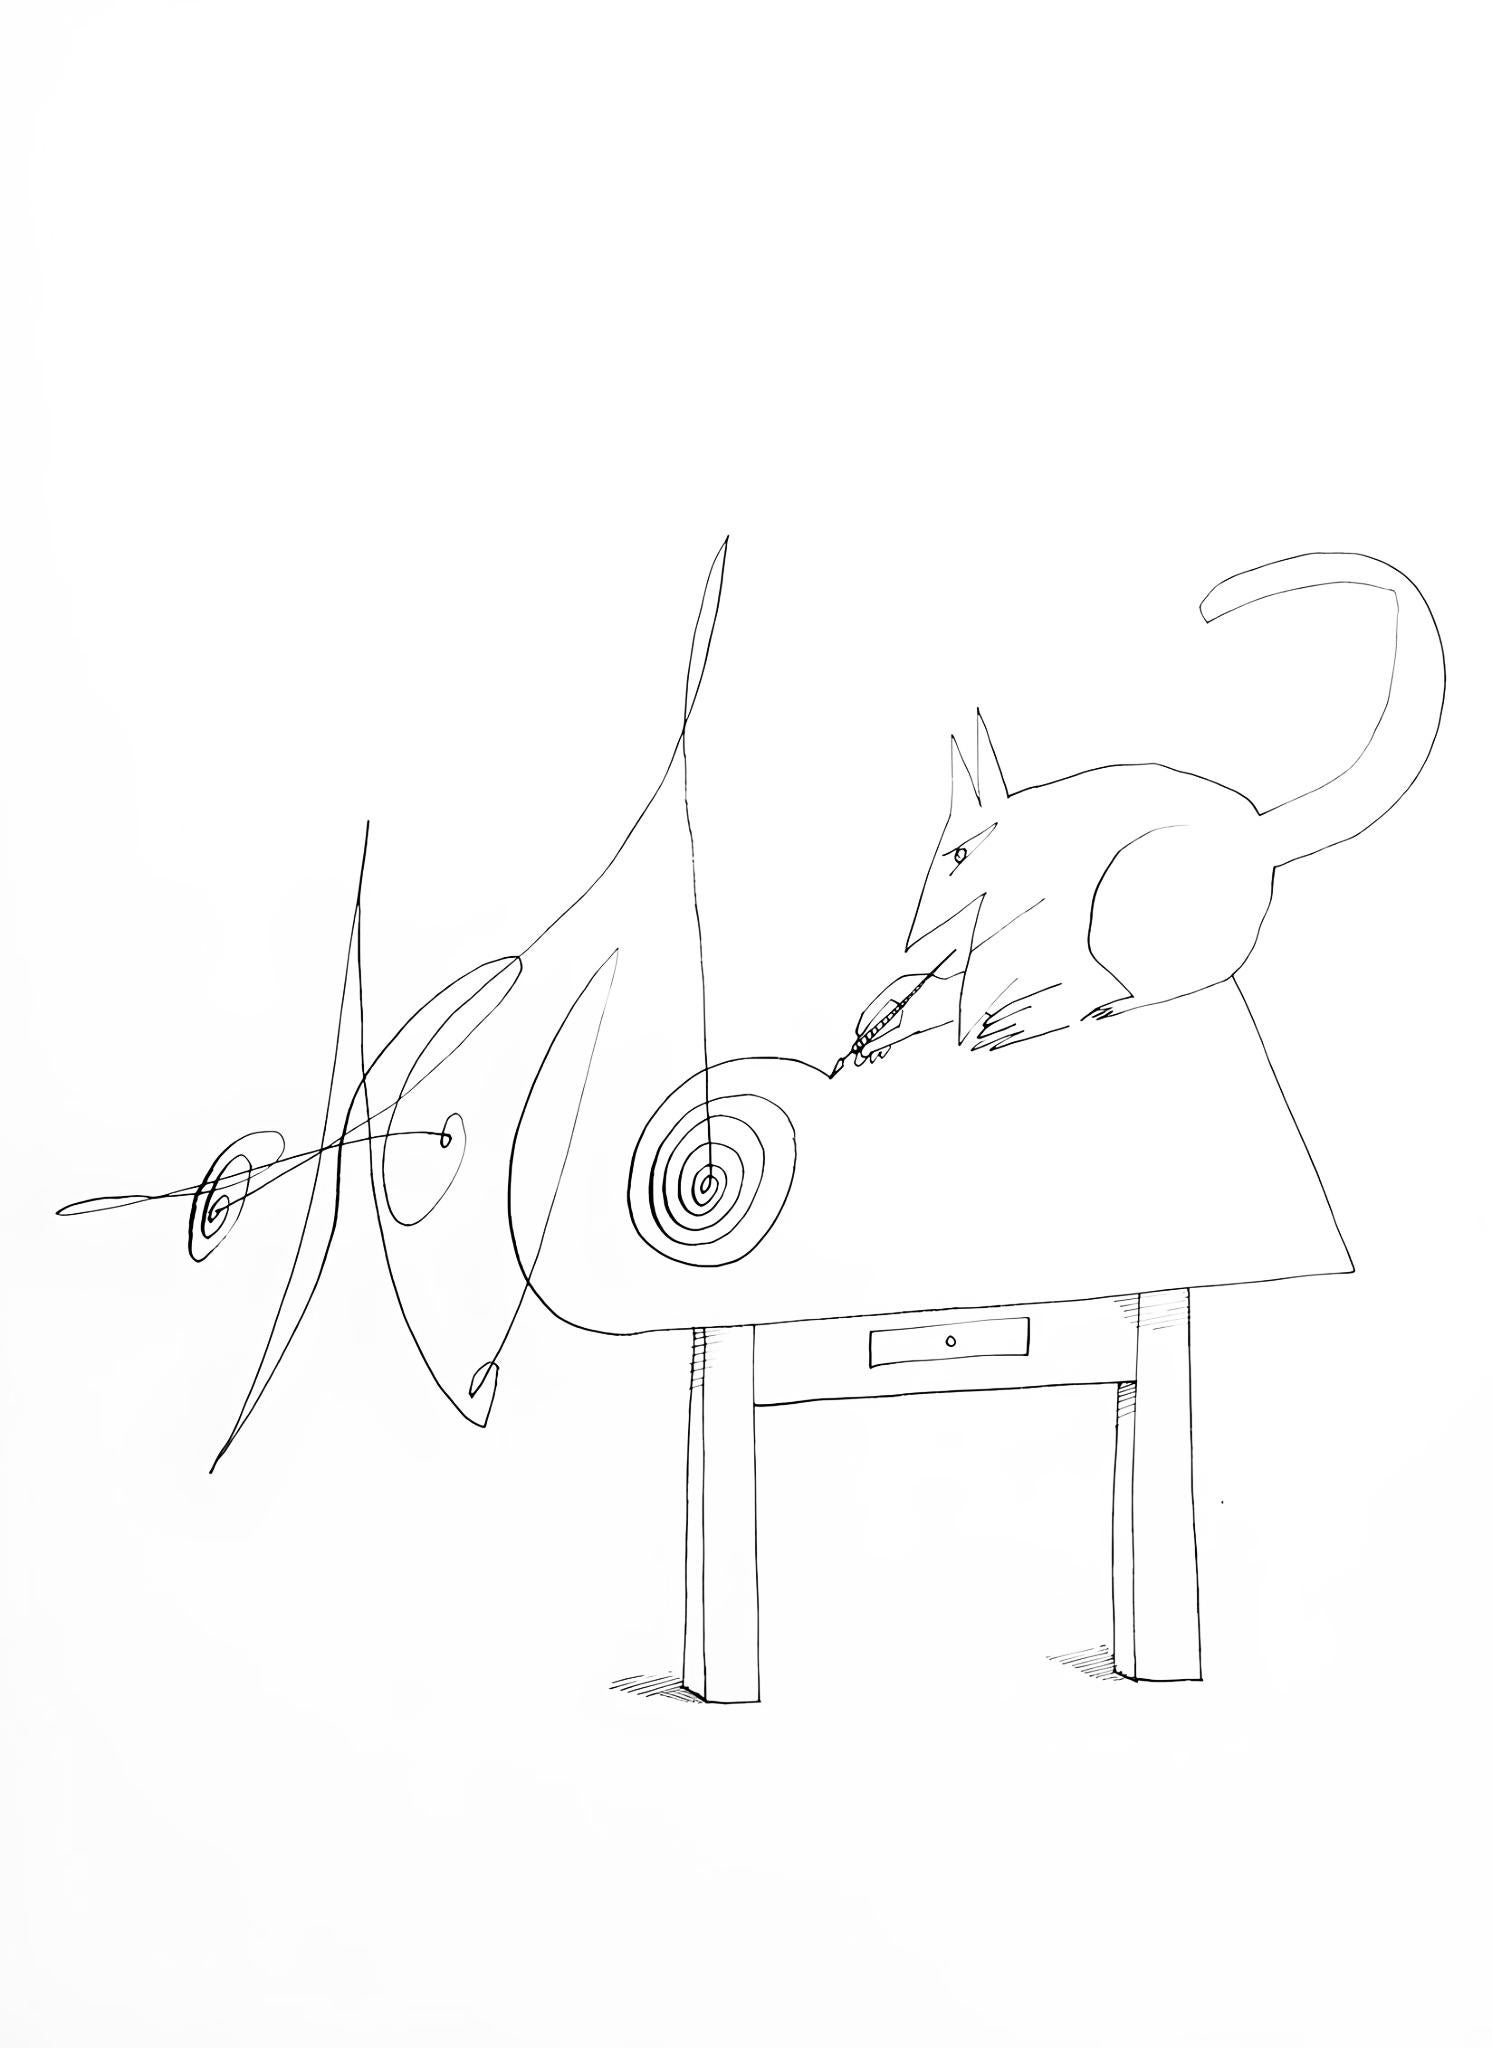 Saul Steinberg Abstract Print - Steinberg, Illustration, Derrière le miroir (after)